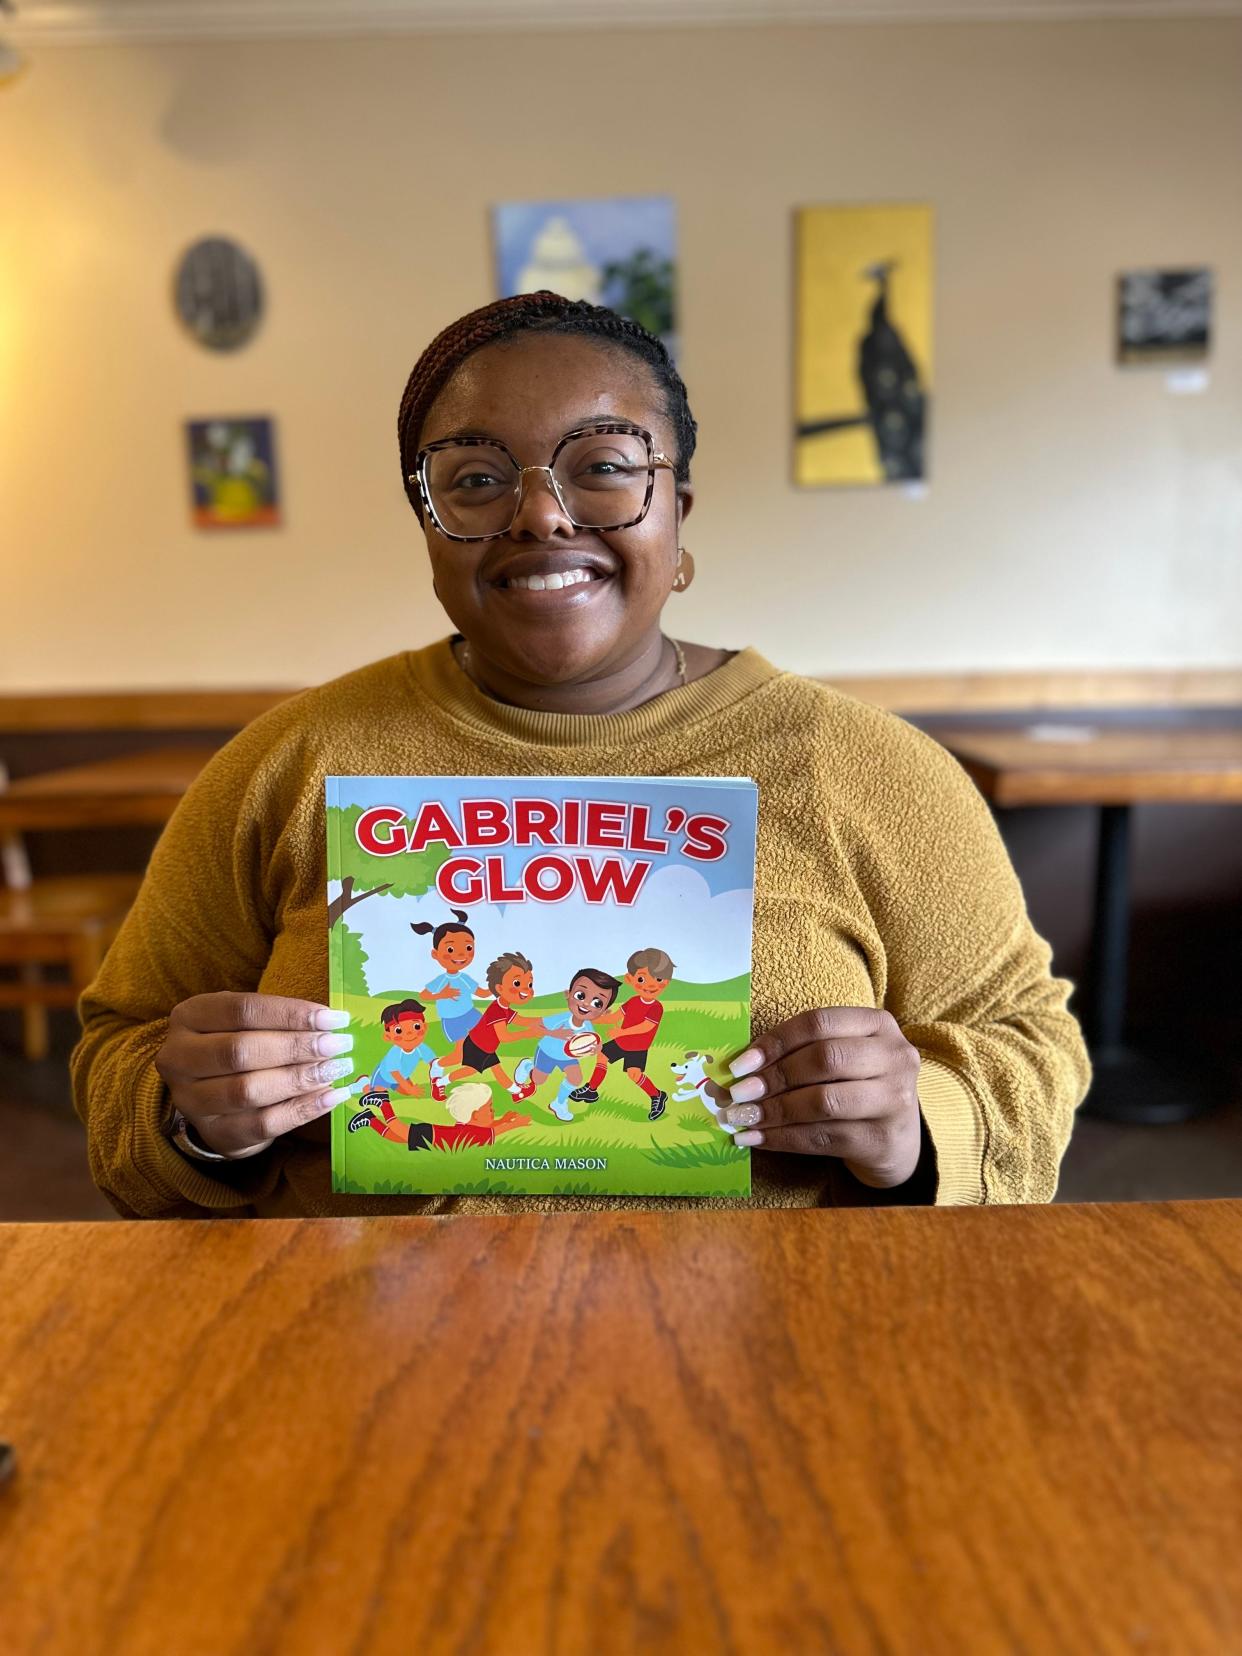 Nautica Mason shows off her book, "Gabriel's Glow" based on her son.